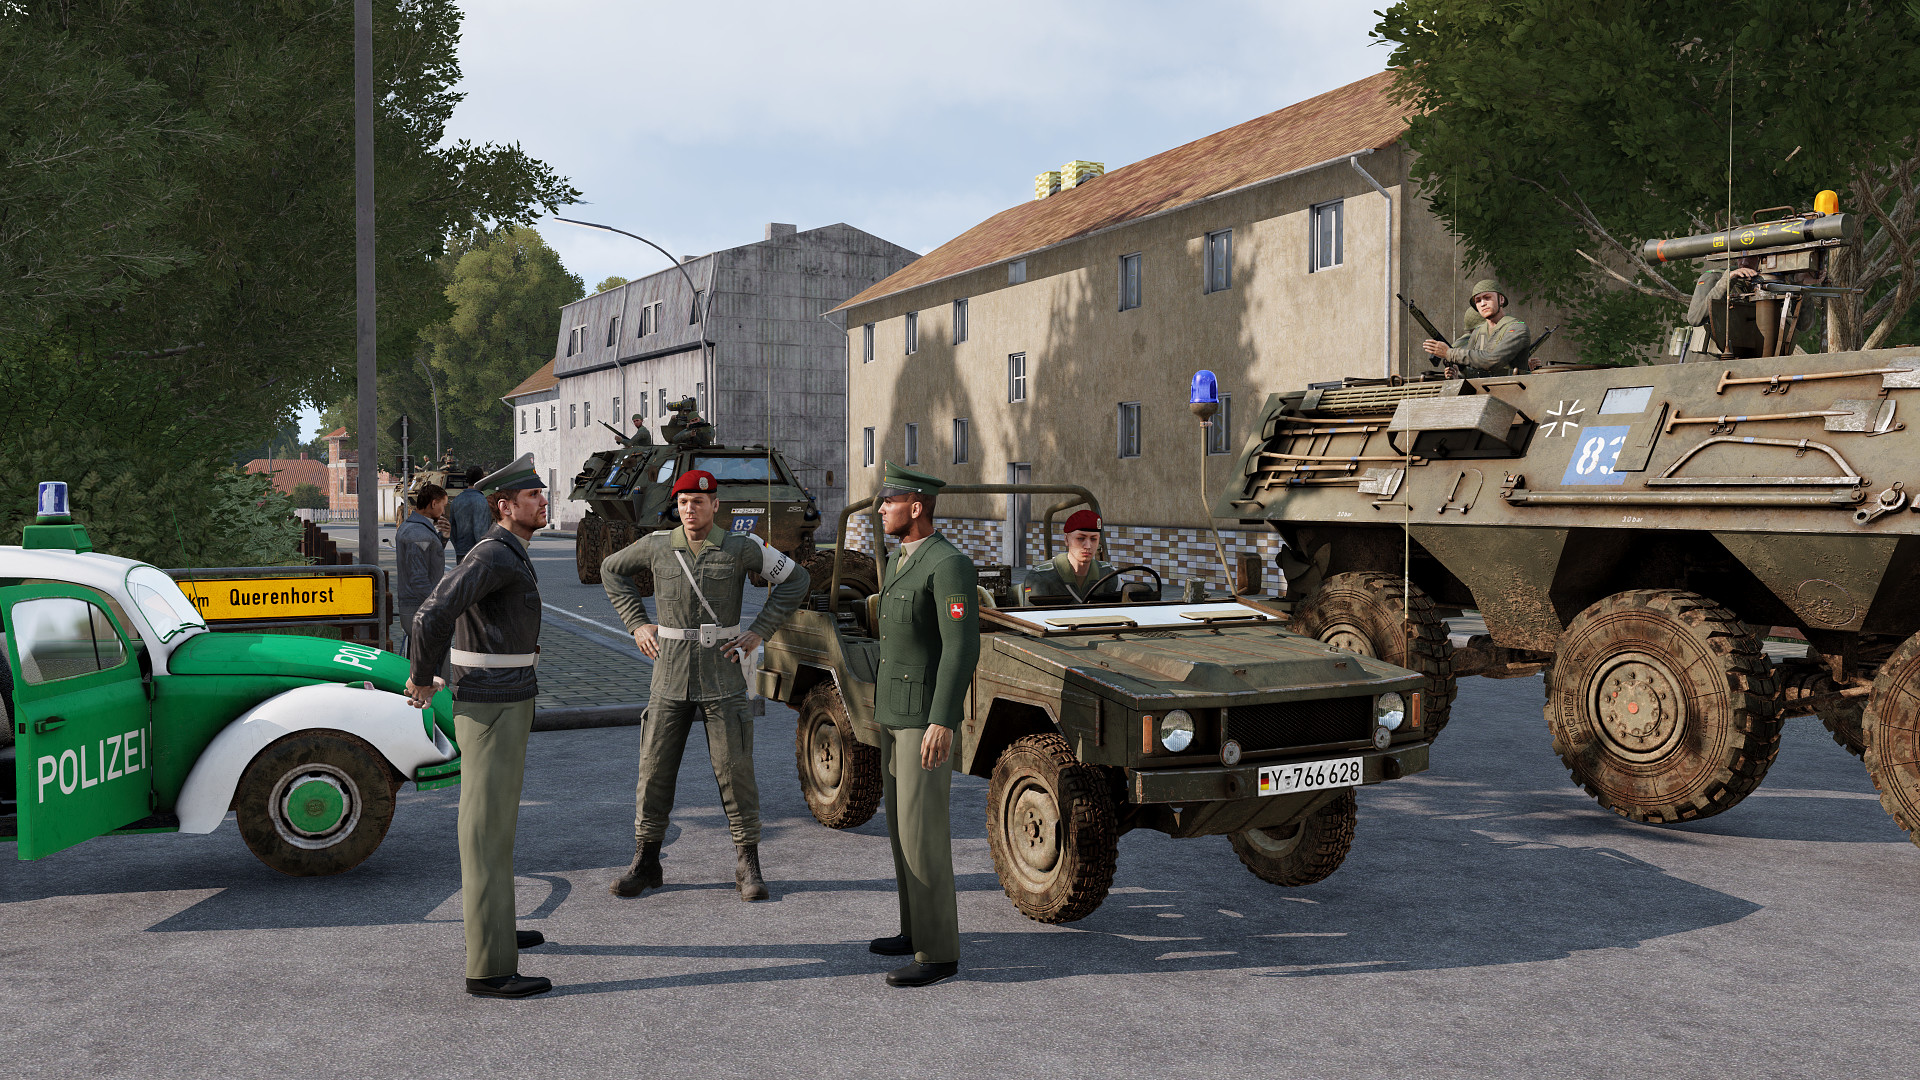 arma-3-creator-dlc-global-mobilization-is-out-now-news-arma-3-official-website